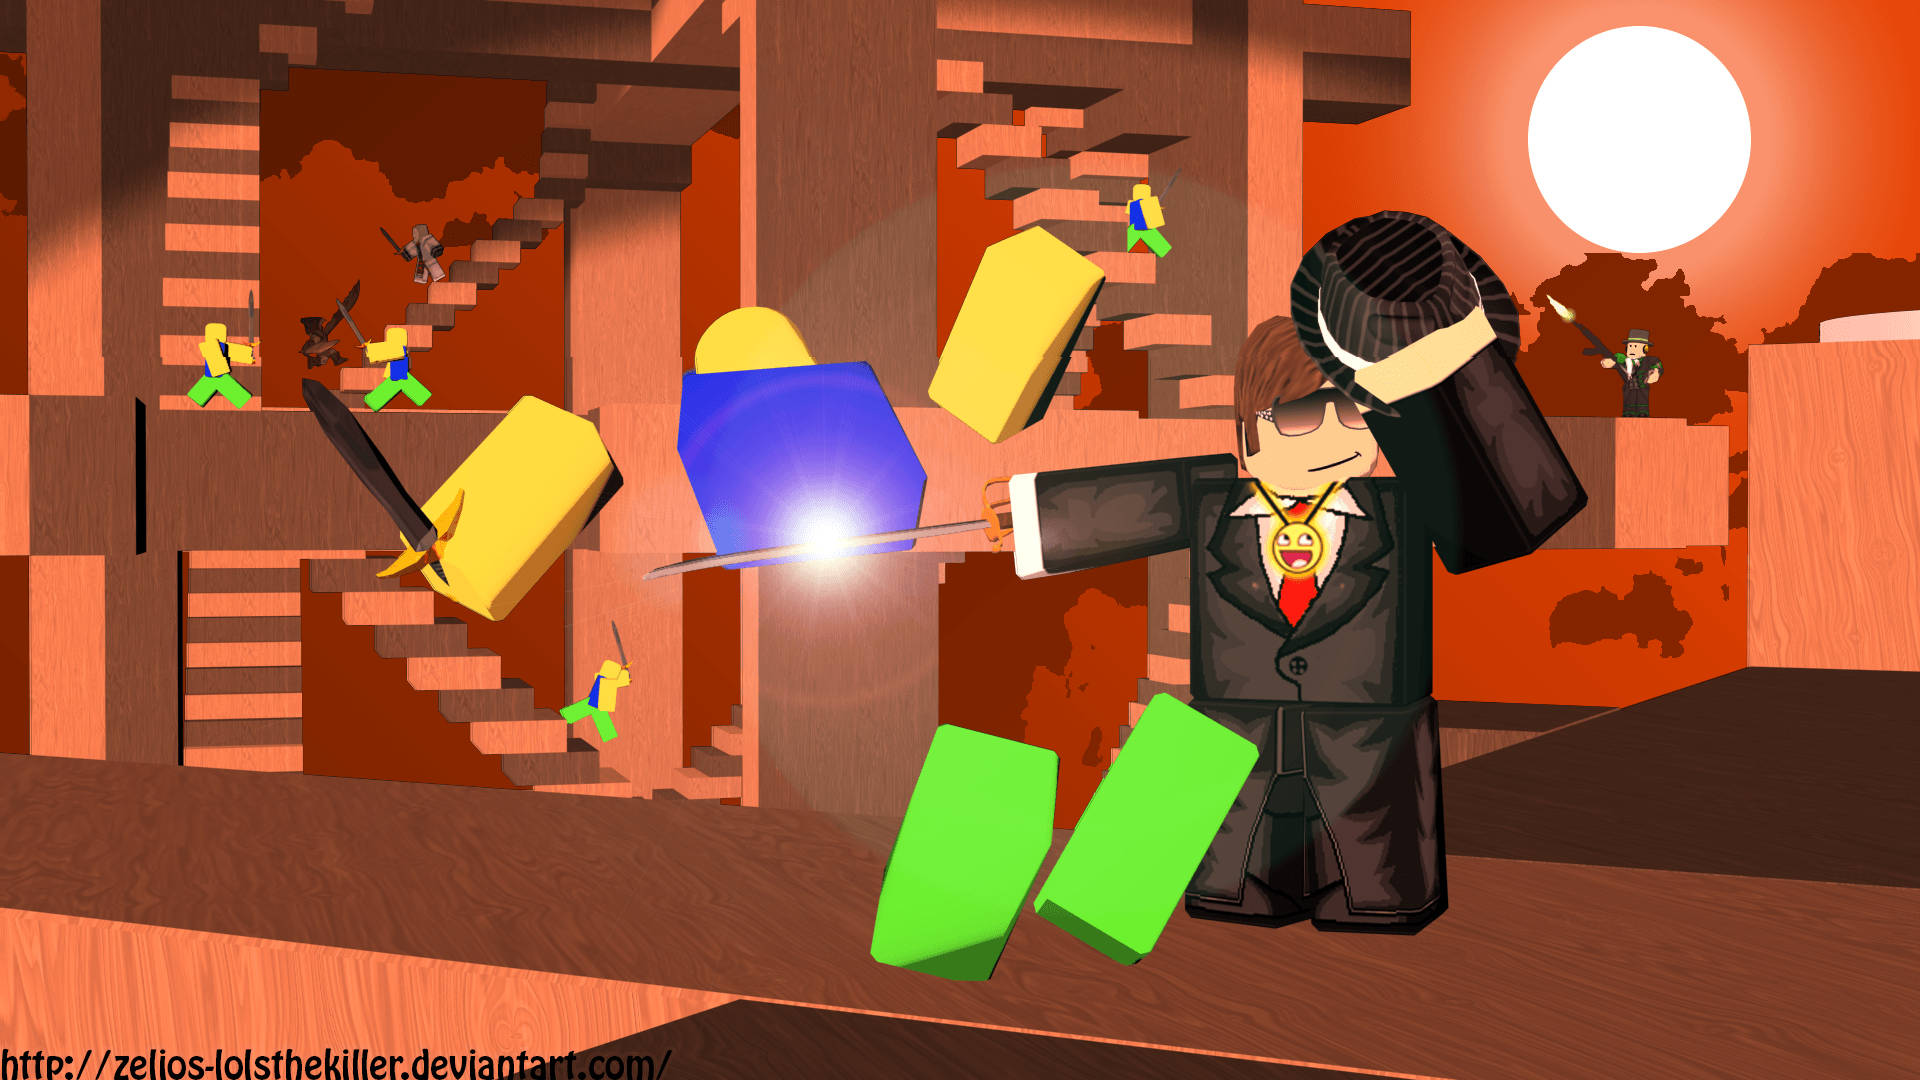 “Play your favorite game in style with a Tuxedo avatar in Roblox!” Wallpaper